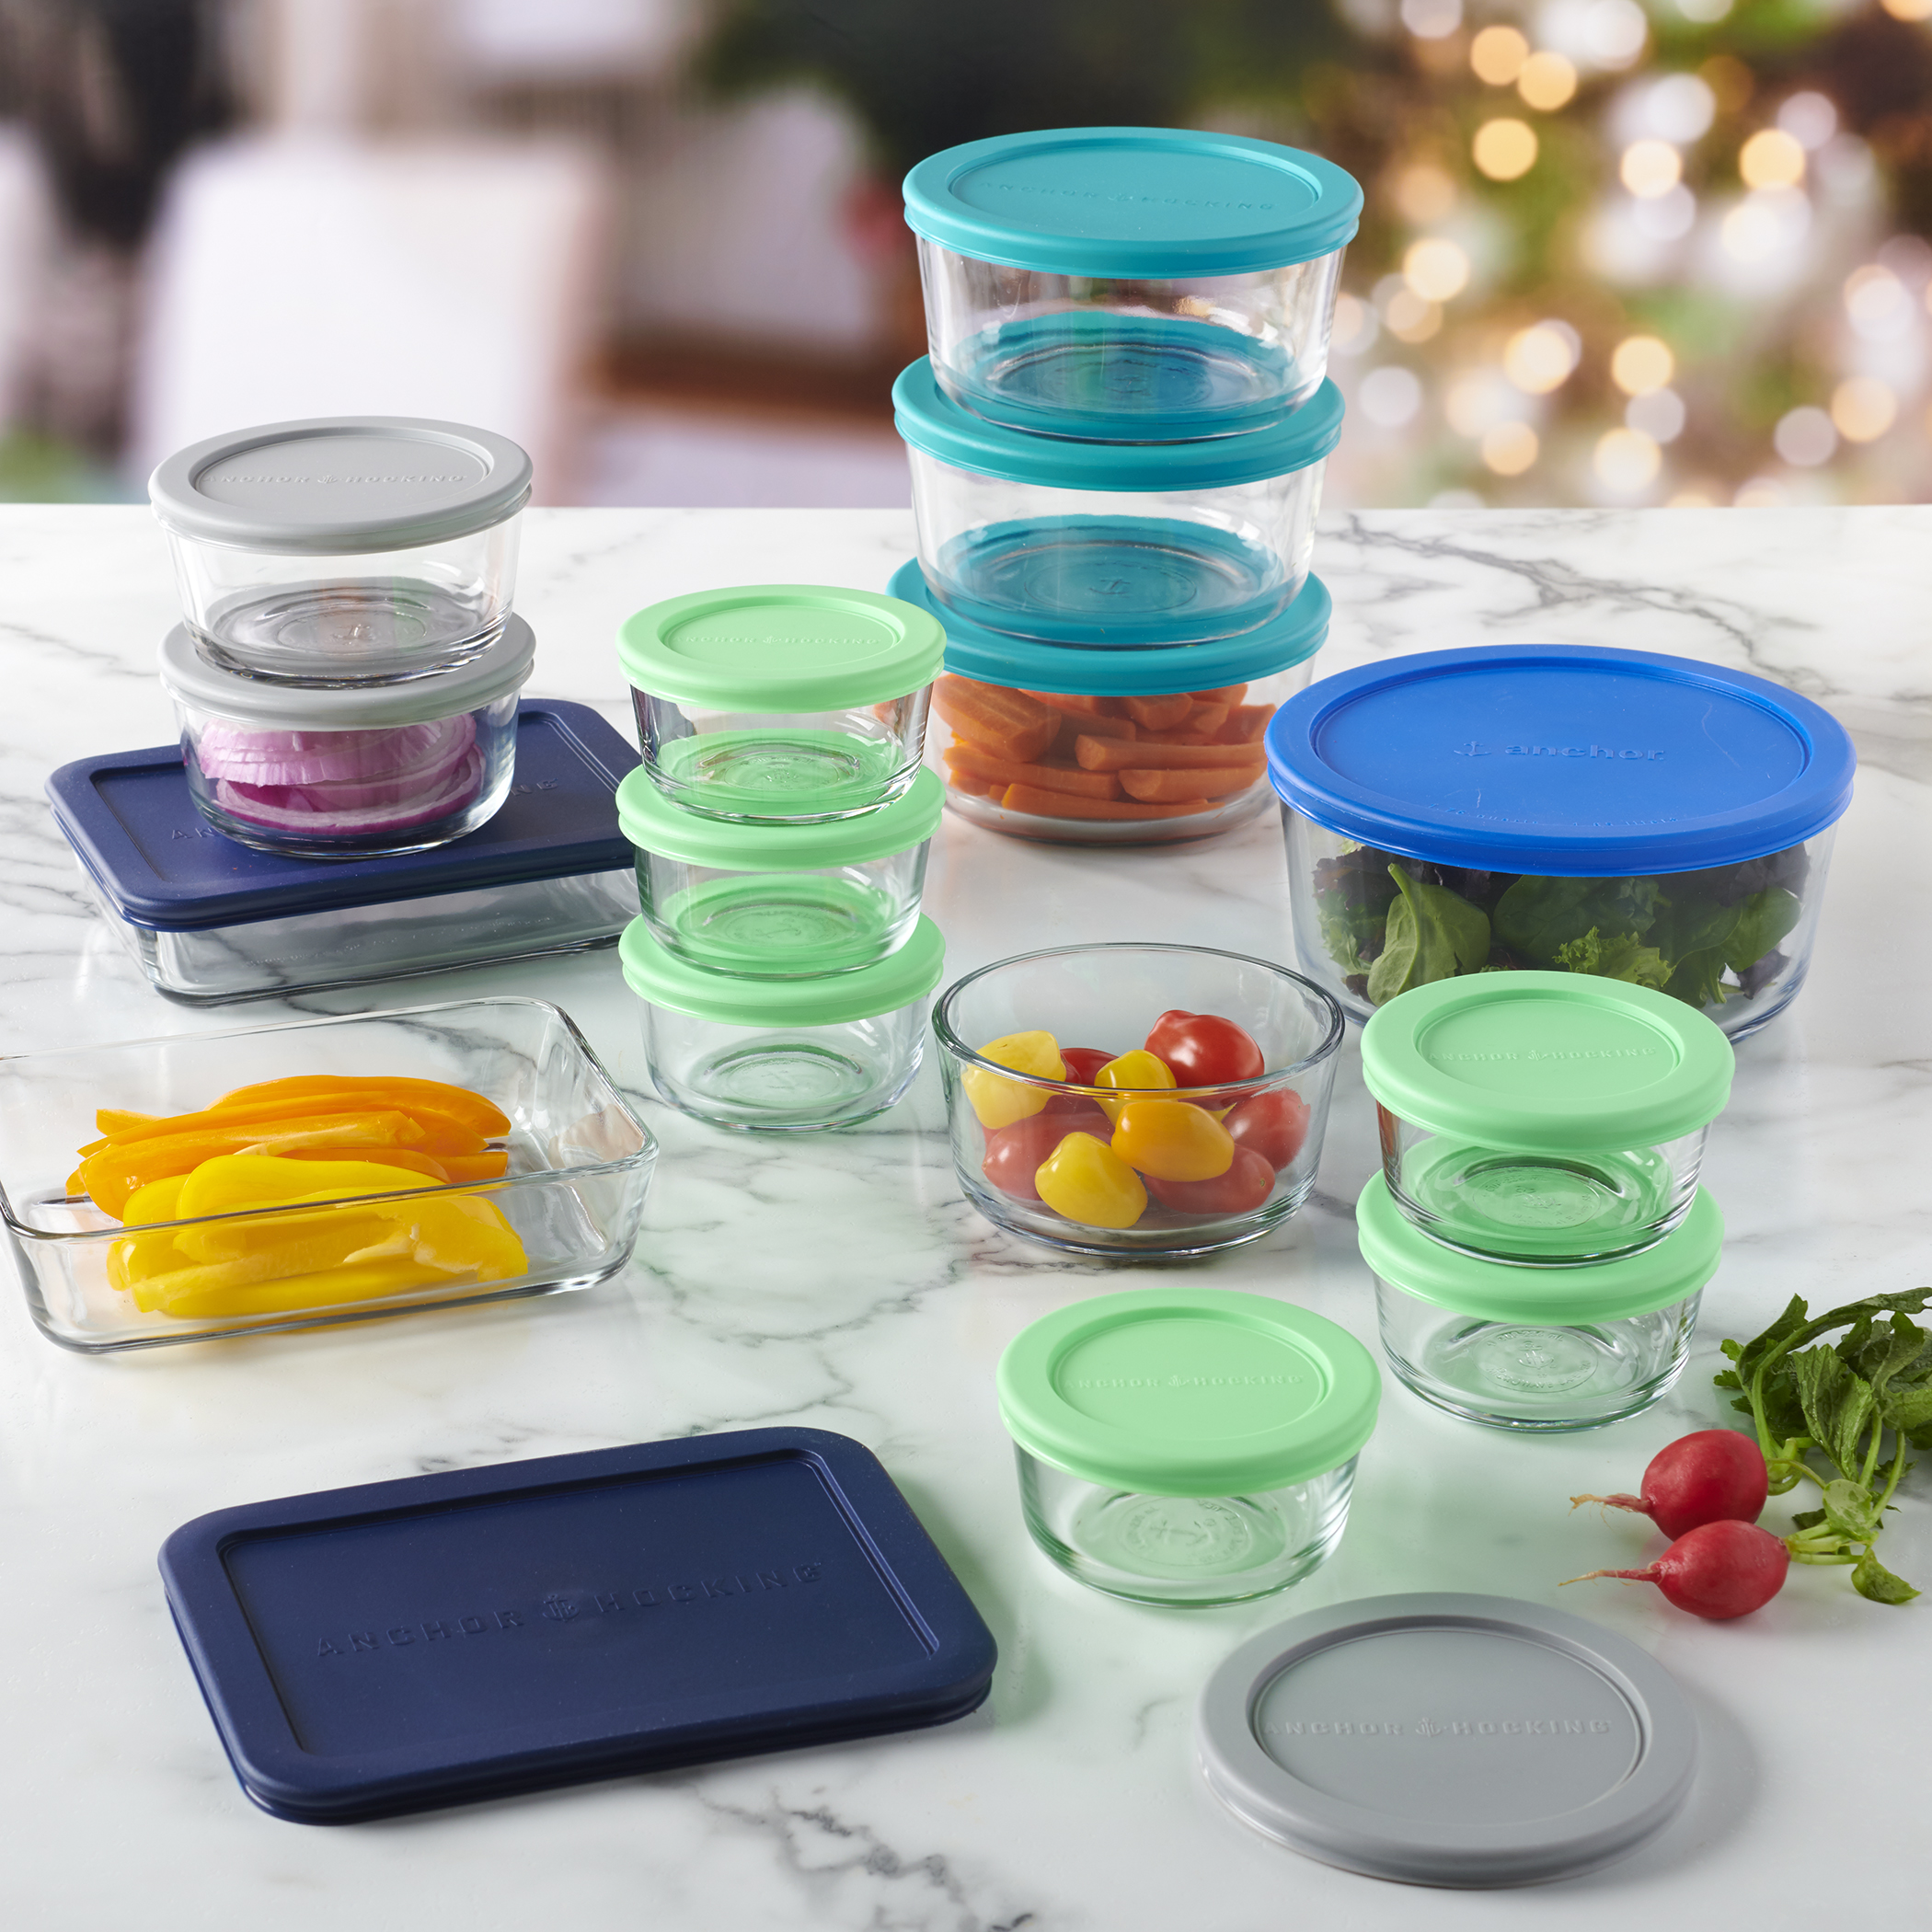 Anchor Hocking Glass Food Storage Containers with Lids, 30 Piece Set - image 5 of 5